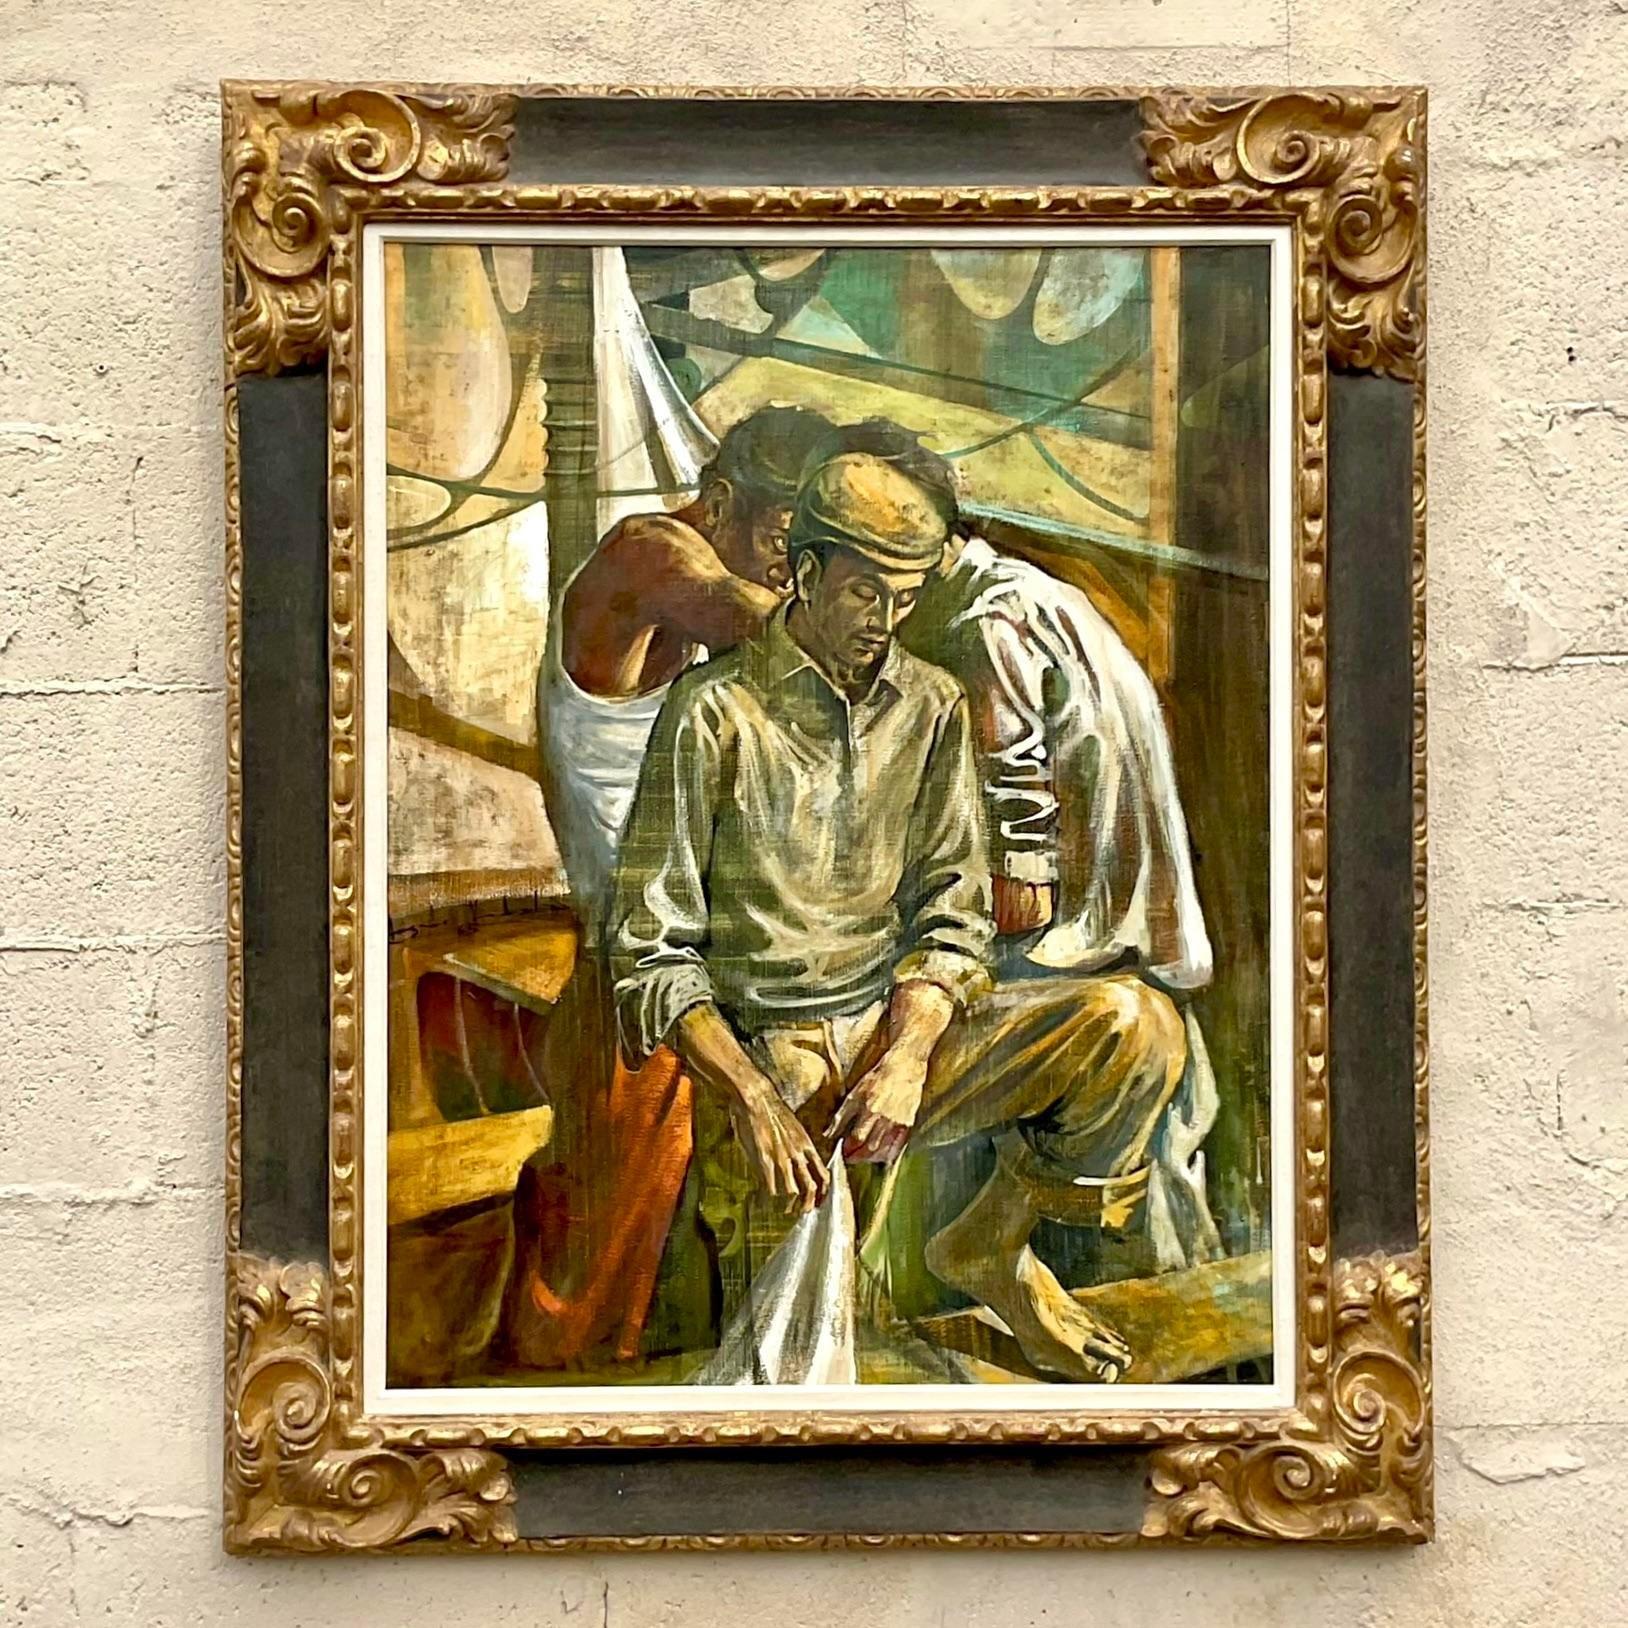 A striking vintage Boho original oil painting on canvas. A Figural composition in deep rich colors. Signed and dated by the artist 1965. An extraordinary gilt tipped wood frame. Acquired from a Palm Beach estate